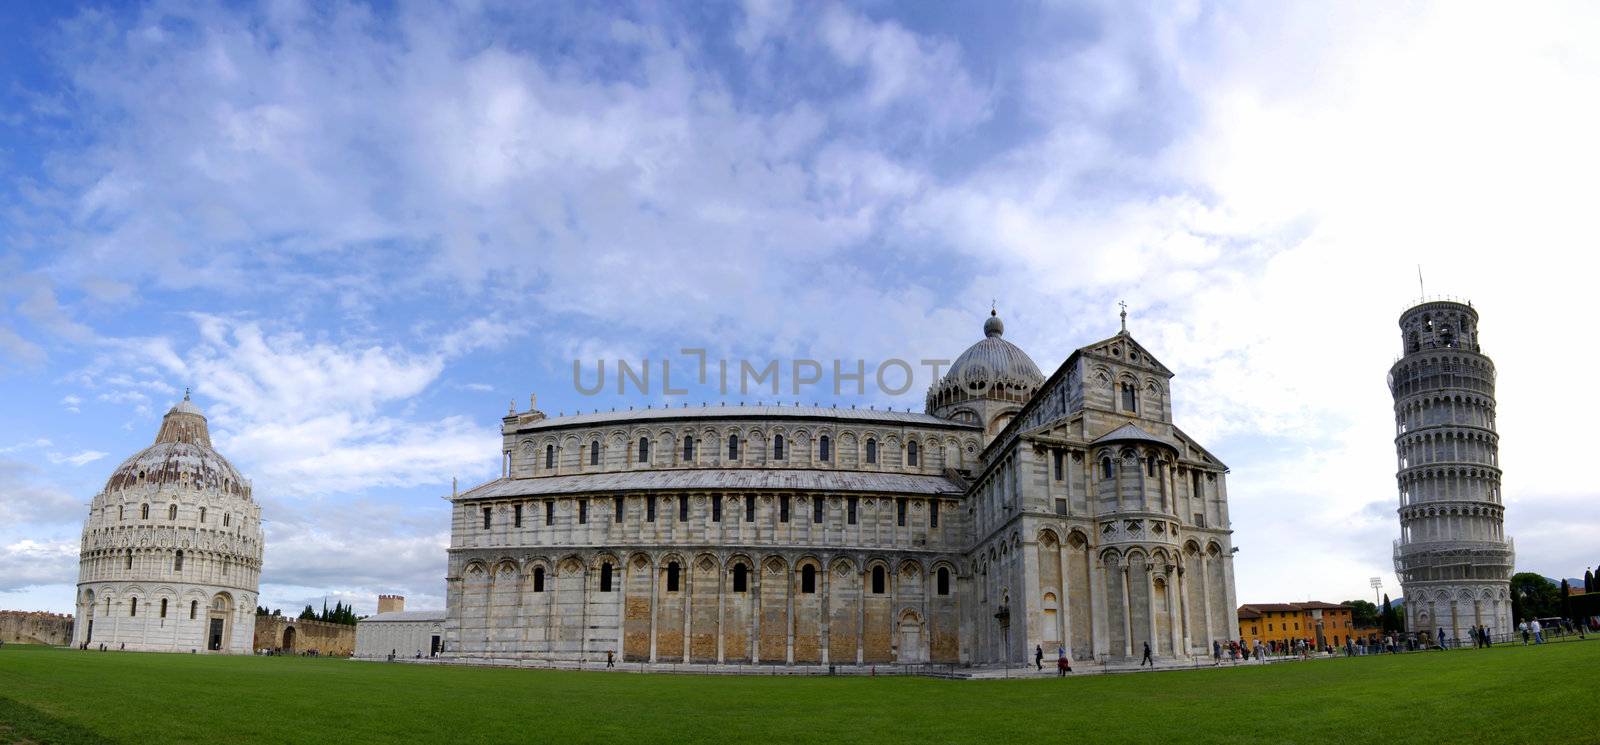 Panoramic photo of the Leaning Tower of Pisa in Italy with cathedral and Baptistery